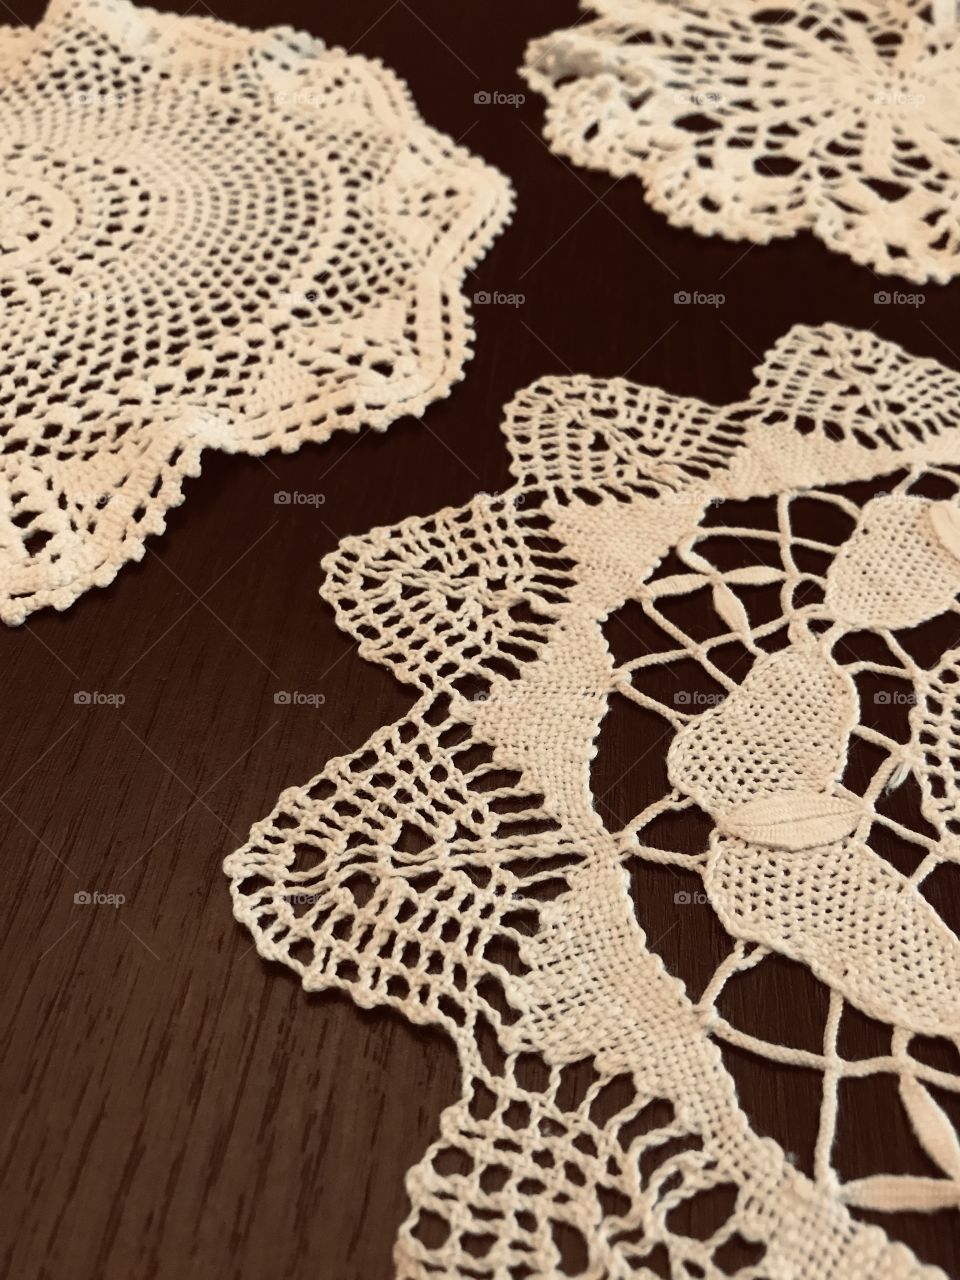 Old handmade lace doilies